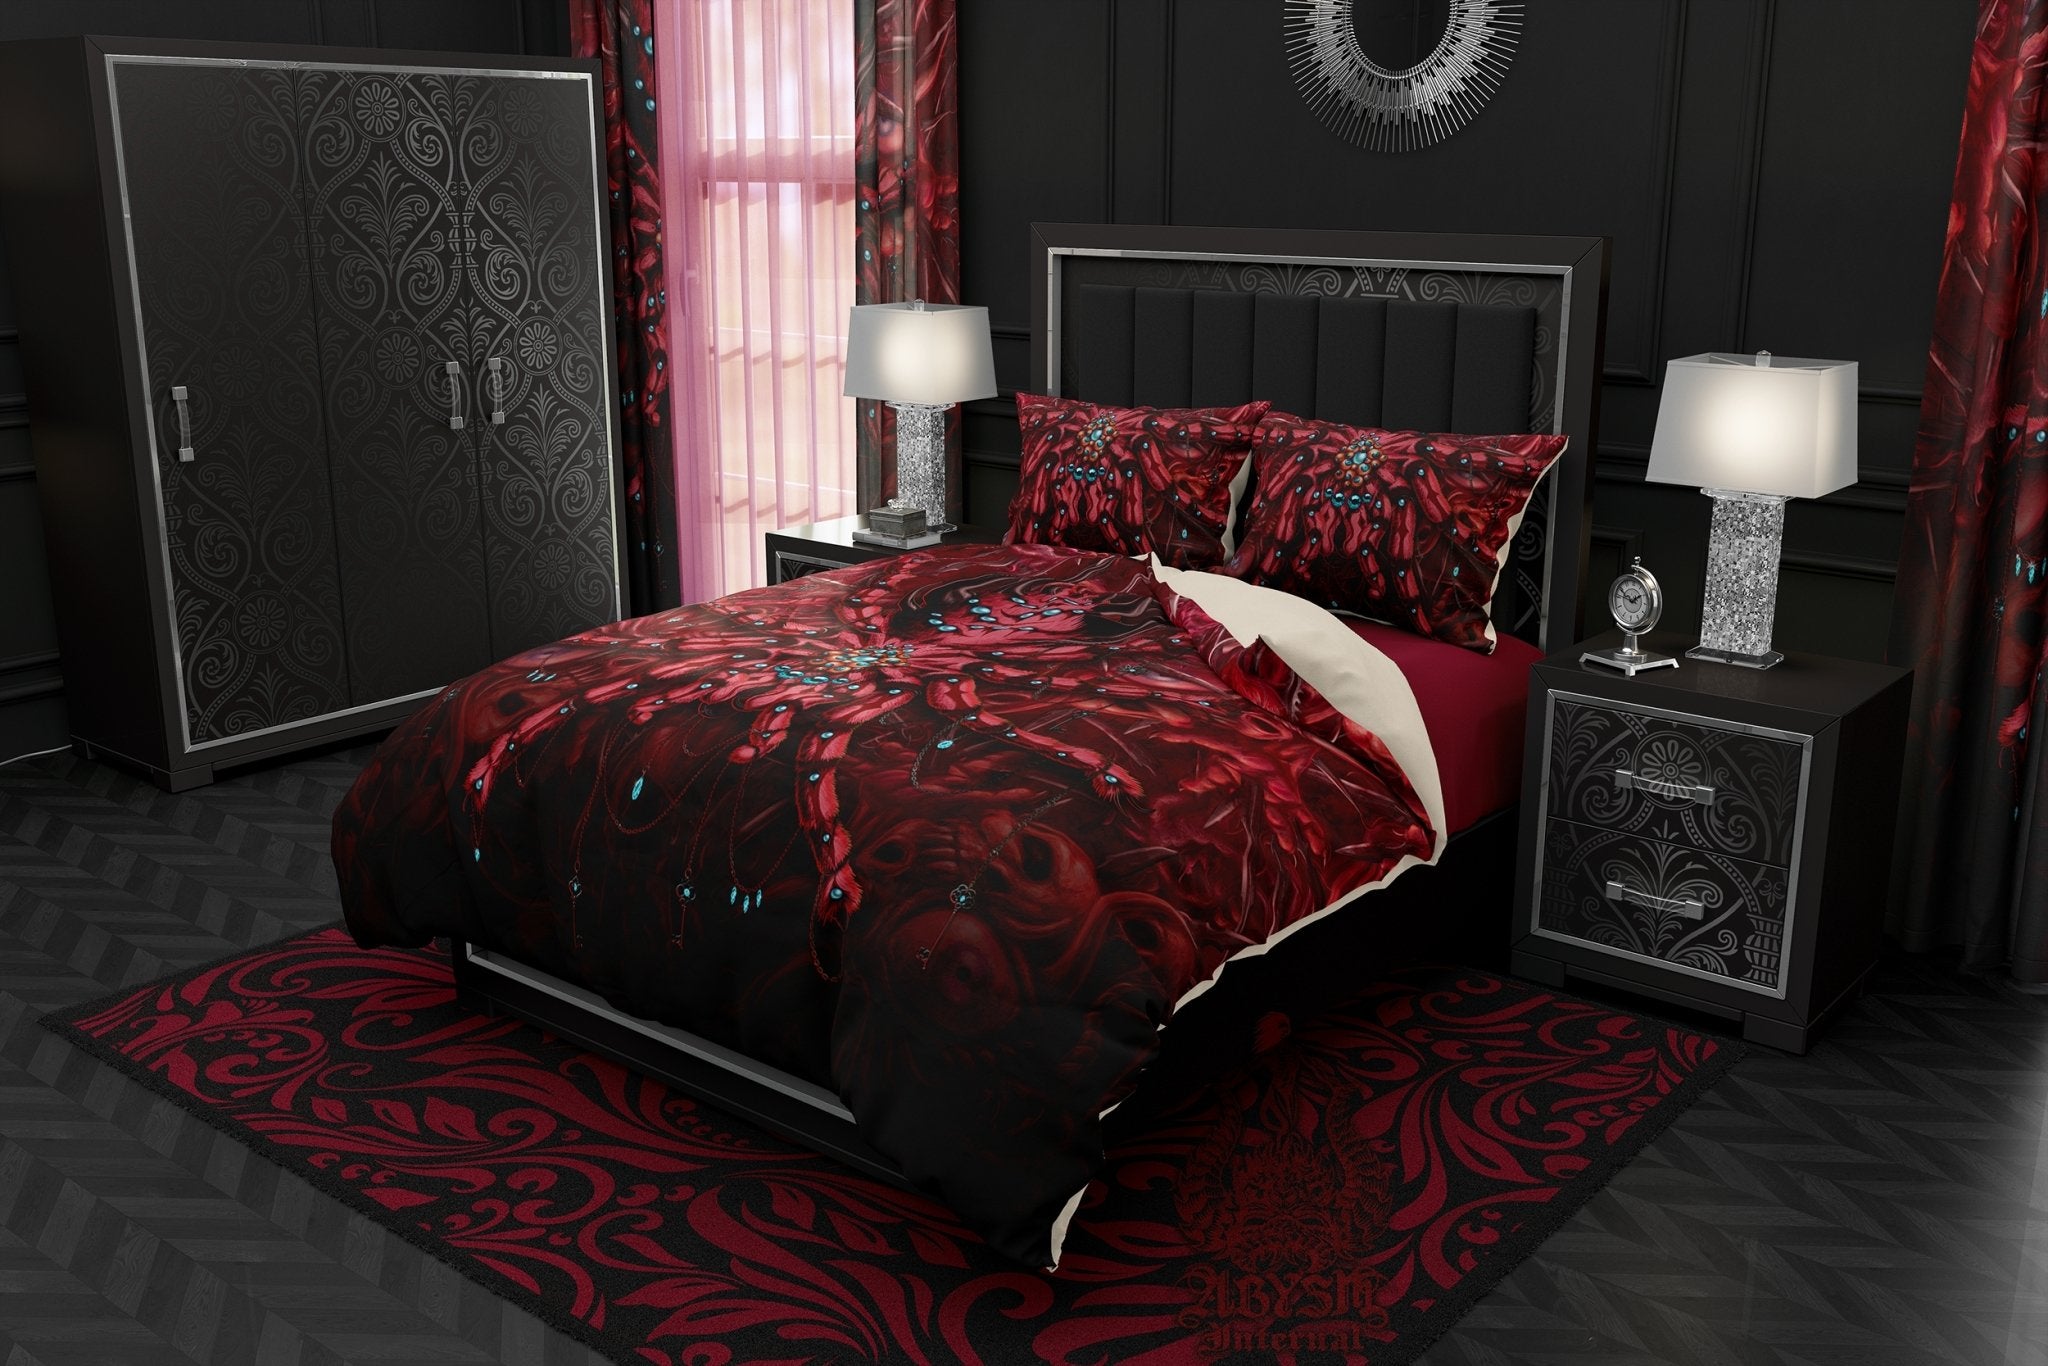 Horror Bedding Set, Comforter and Duvet, Bed Cover and Bedroom Decor, King, Queen and Twin Size - Tarantula Spider, Gore and Blood Monster - Abysm Internal